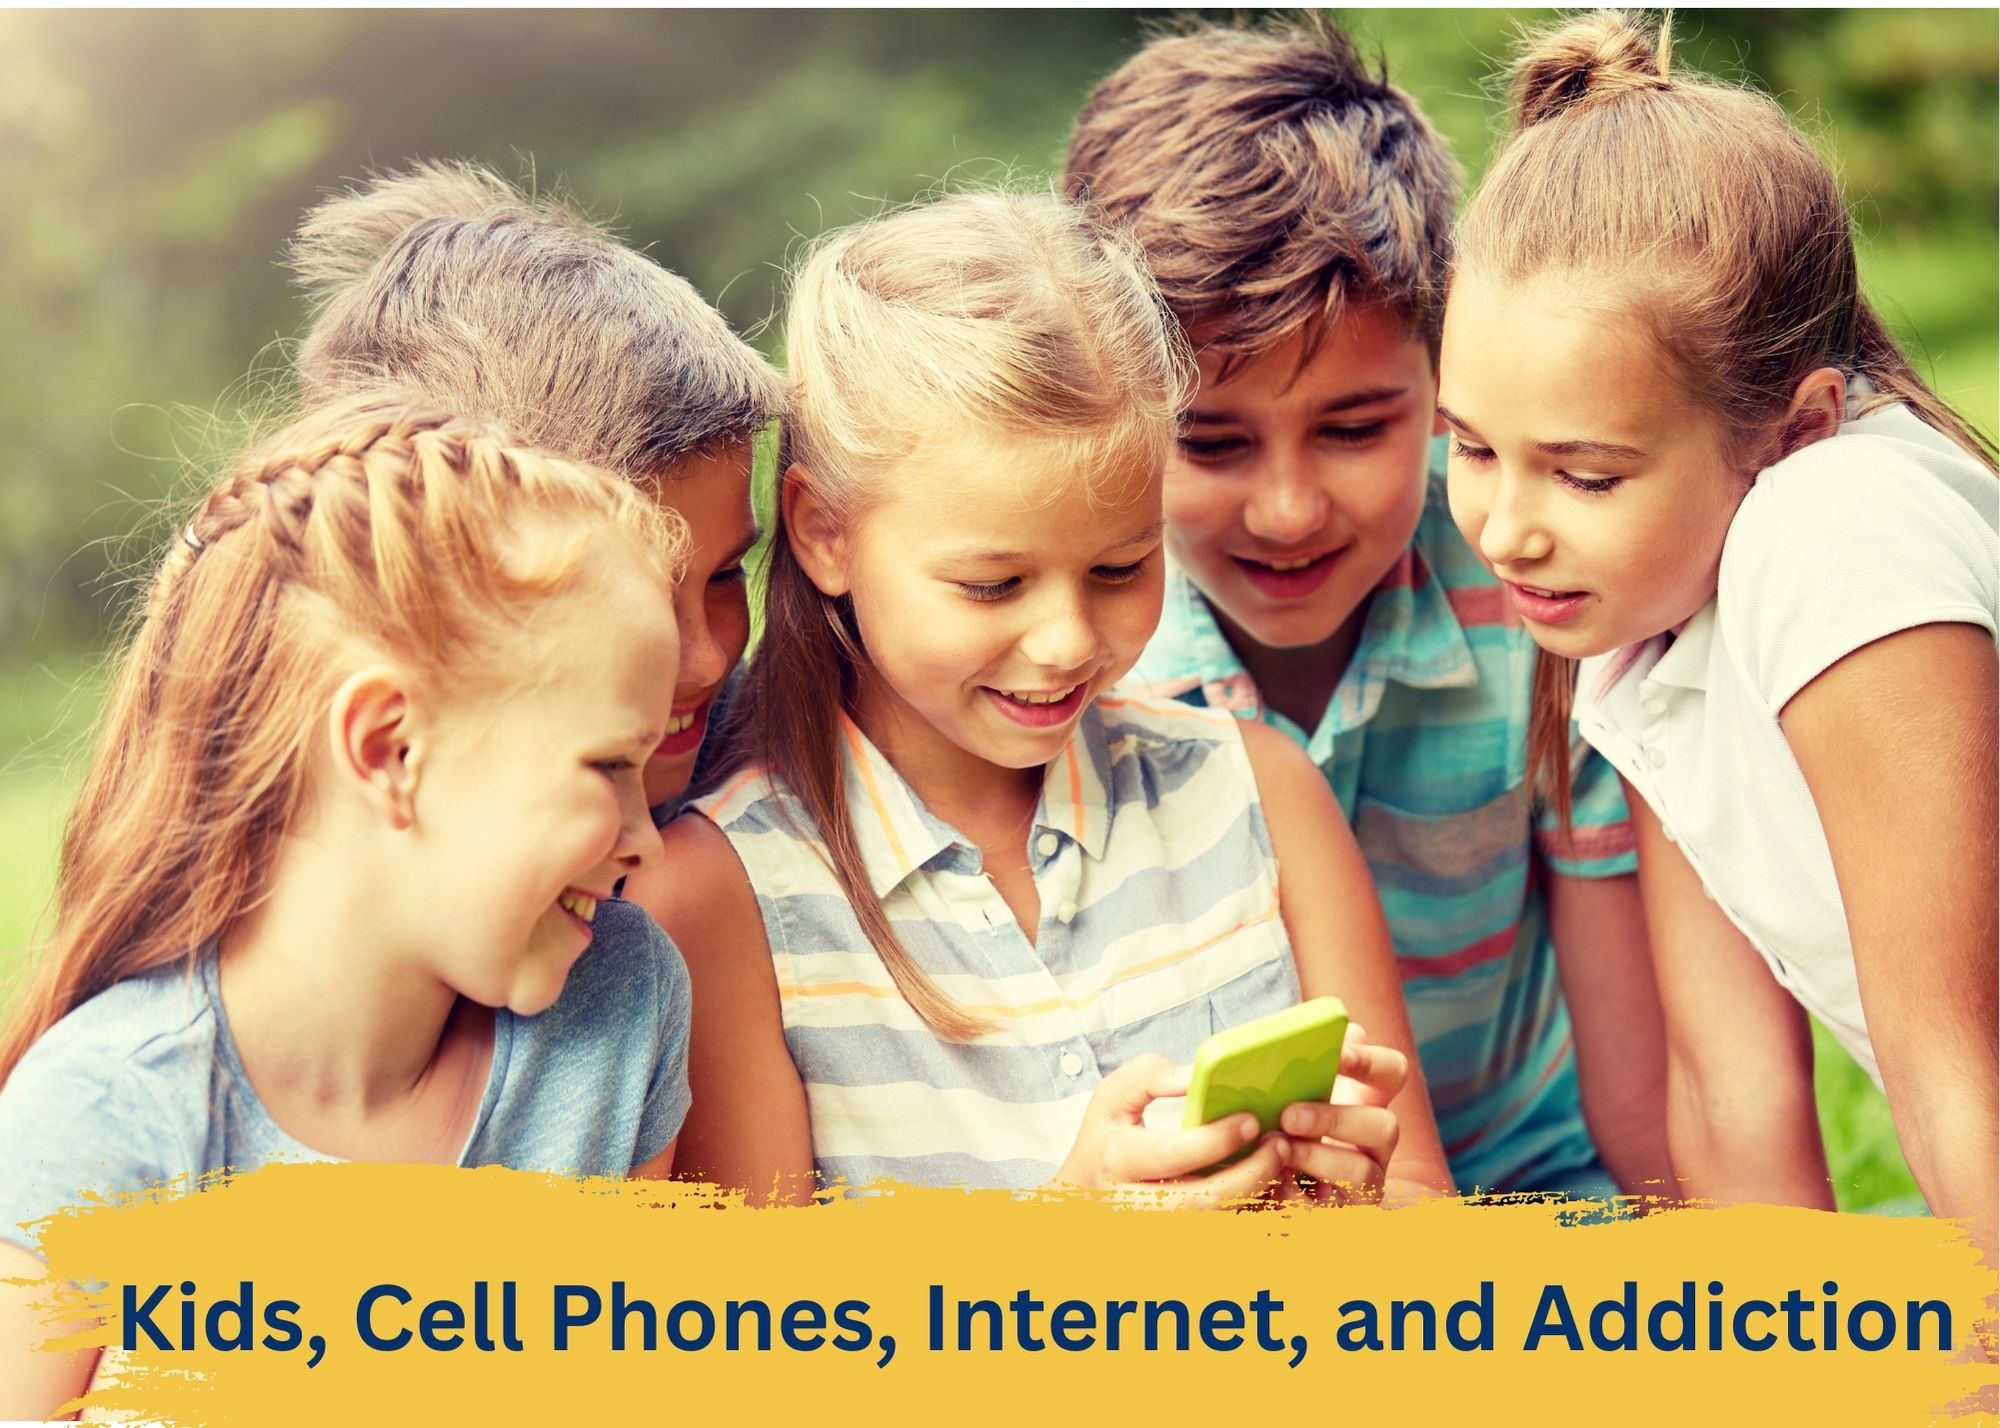 Kids, Cell Phones, Internet, and Addiction